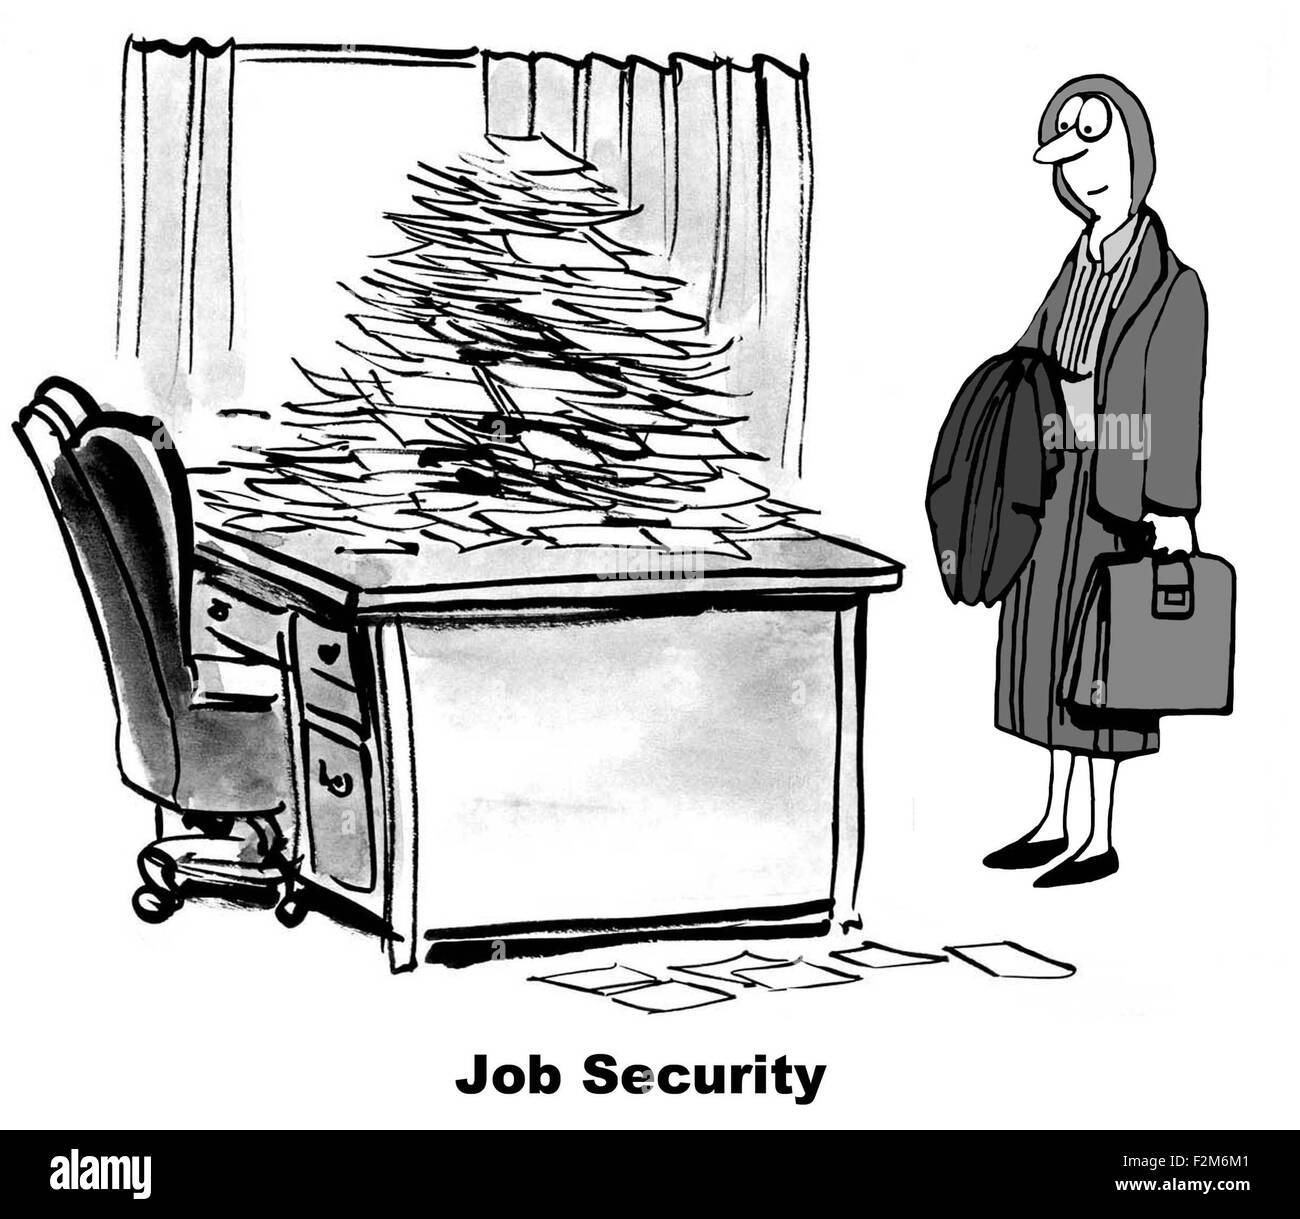 Business cartoon showing businesswoman looking at desk overflowing with papers, 'Job Security'. Stock Photo